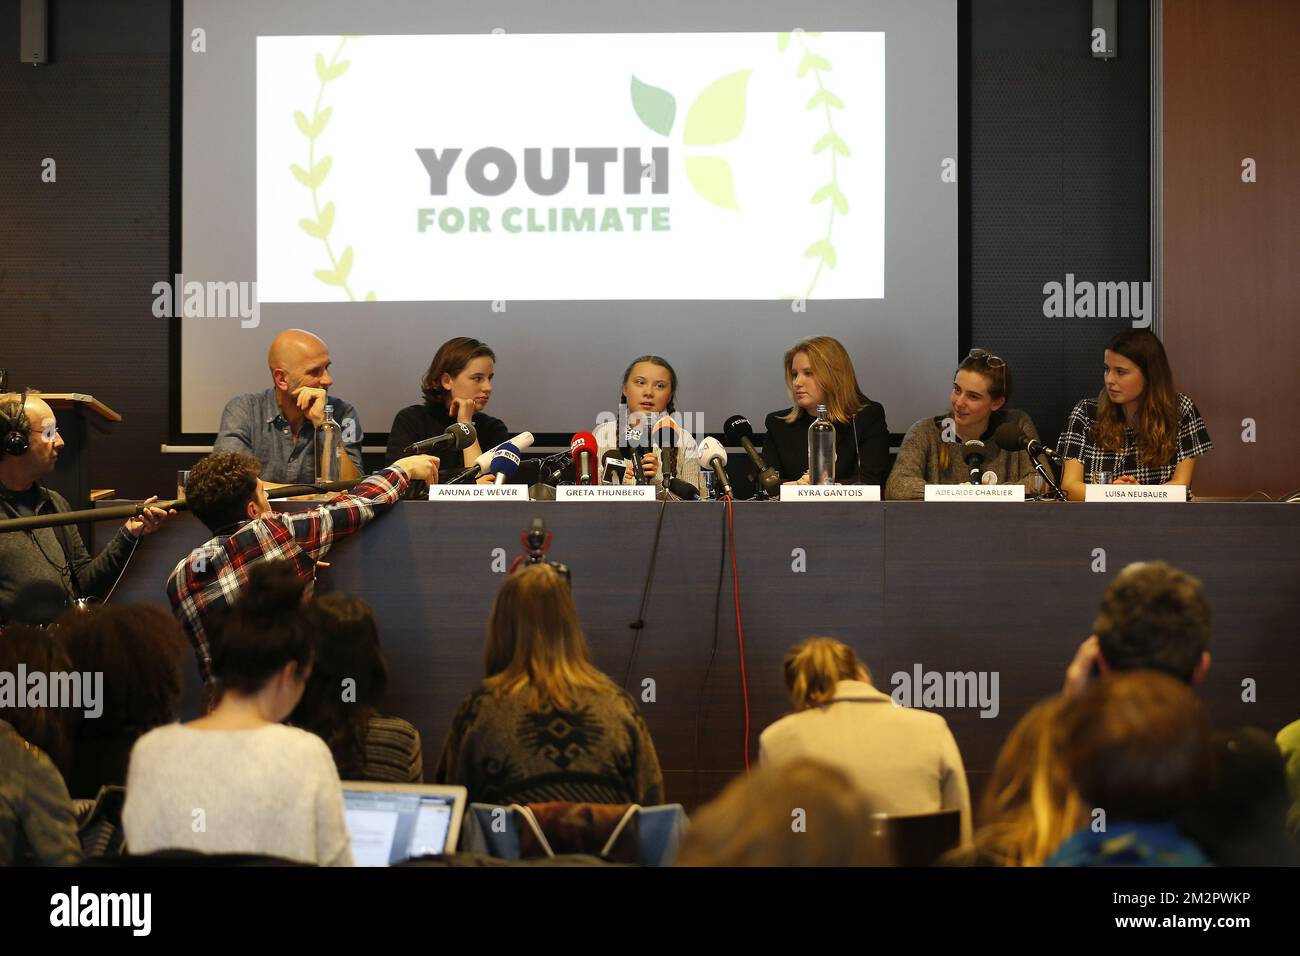 Nic Balthazar, climate activist Anuna De Wever, Swedish climate activist Greta Thunberg, climate activist Kyra Gantois, climate activist Adelaide Charlier and climate activist Luisa Neubauer pictured during a press conference following a student strike action, organized by 'Youth For Climate', urging pupils to skip classes to protest a lack of climate awareness, Thursday 21 February 2019 in Brussels. This marks the seventh consecutive week youths take the streets on Thursday. The action is inspired by the 'School Strike' of Swedish 15-year-old Greta, joining the protests in Brussels today. BEL Stock Photo